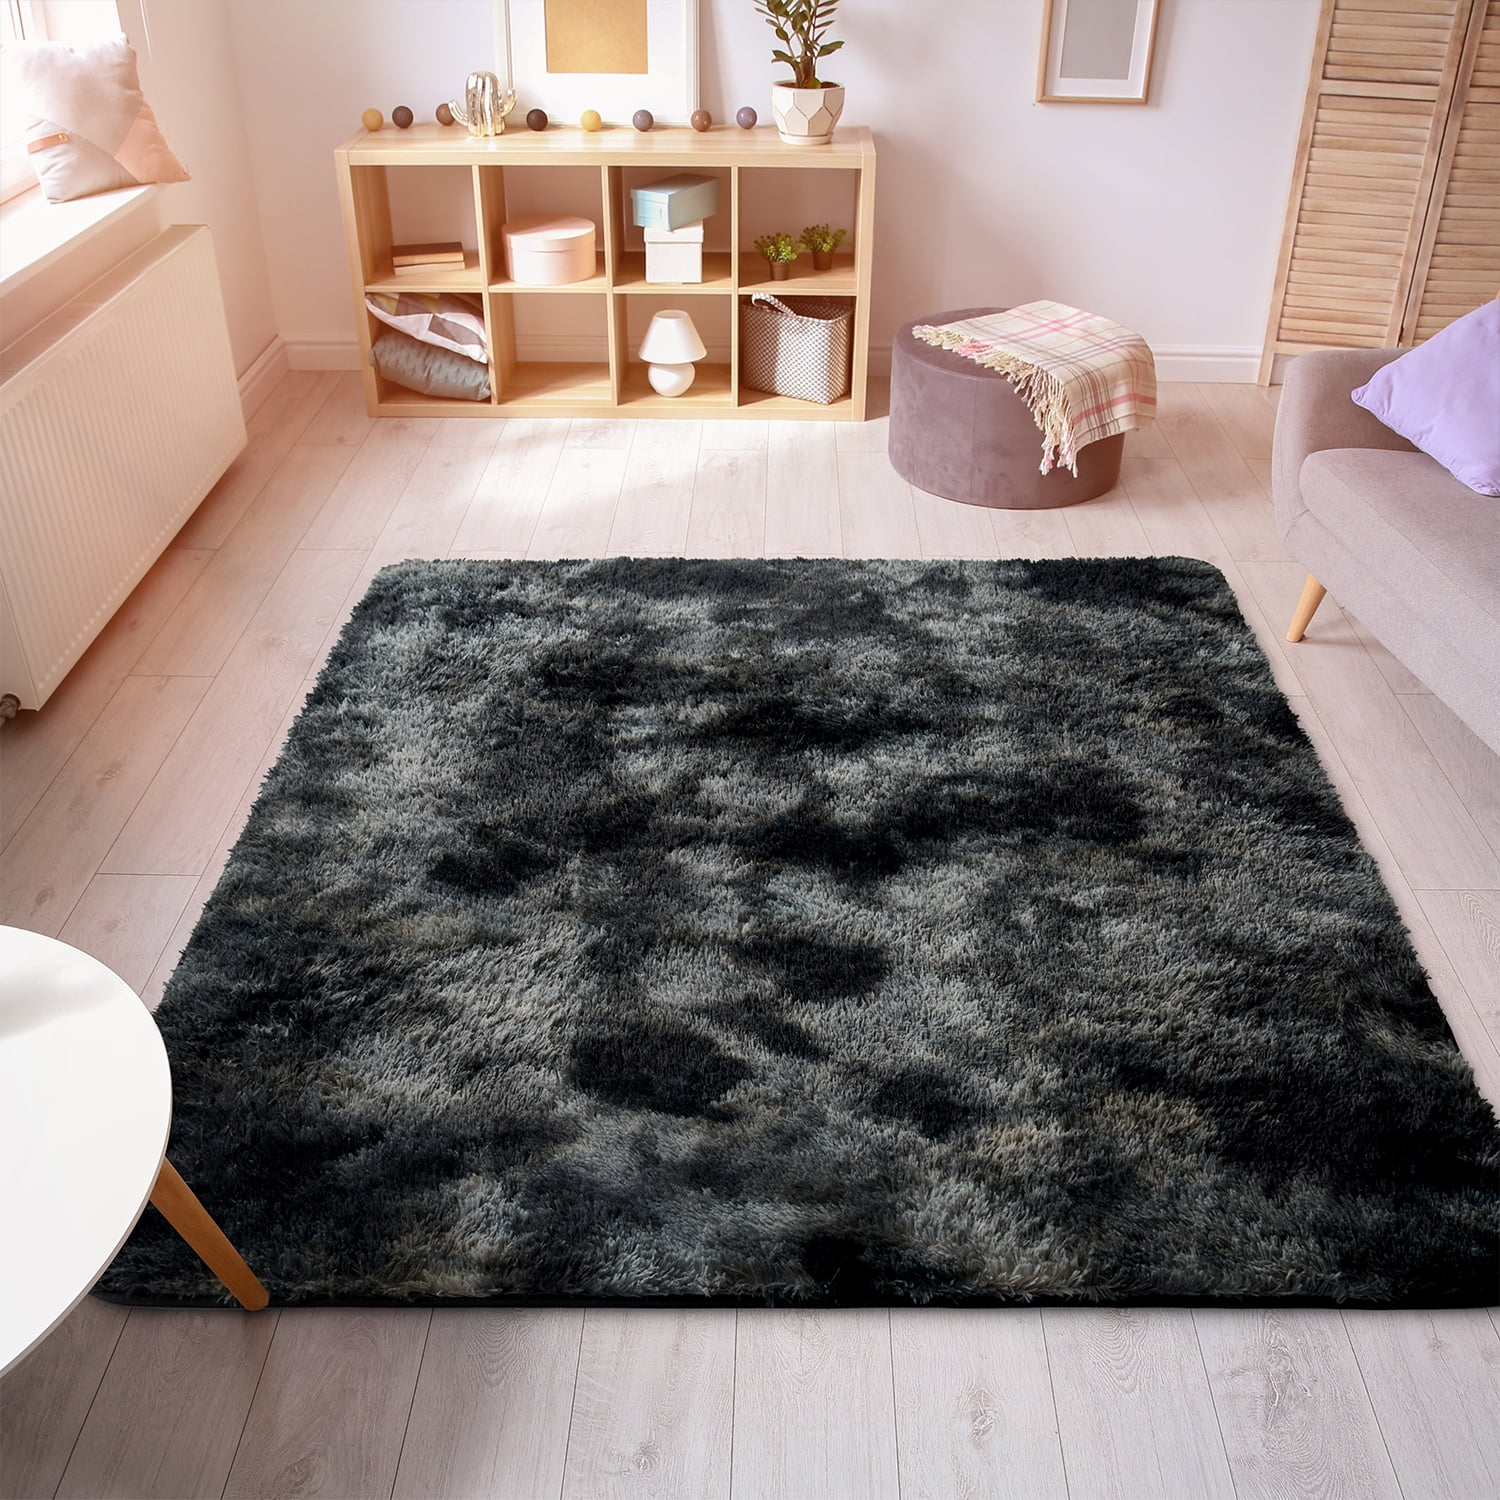 New Luxury Anti Slip Small and Large Rugs Bedroom Kitchen Living Area Carpet Rug 